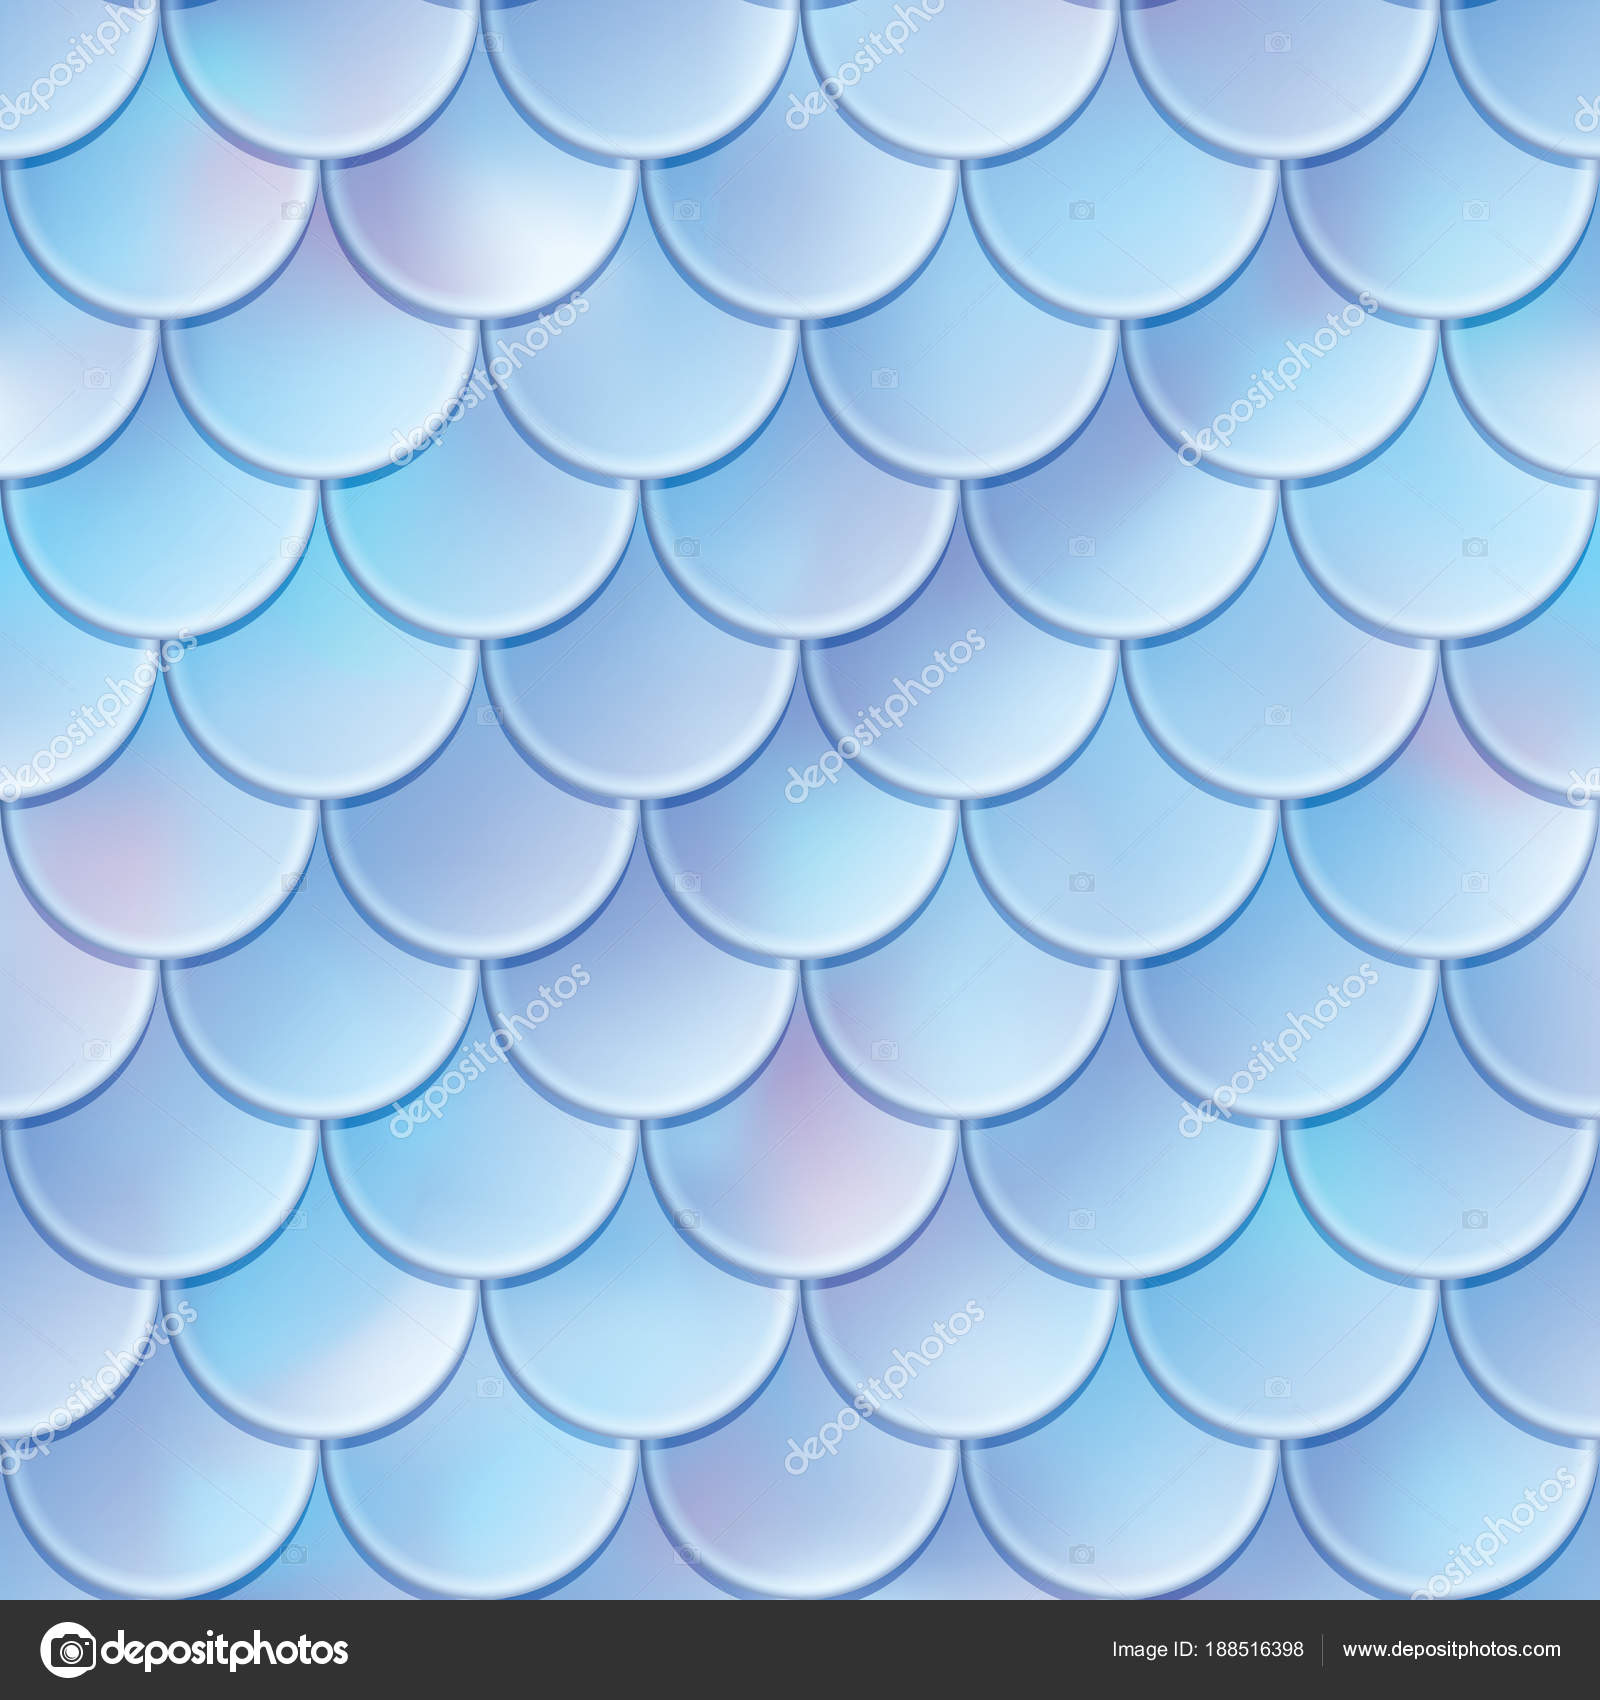 Fish scales seamless pattern. Mermaid tail texture. Vector ...